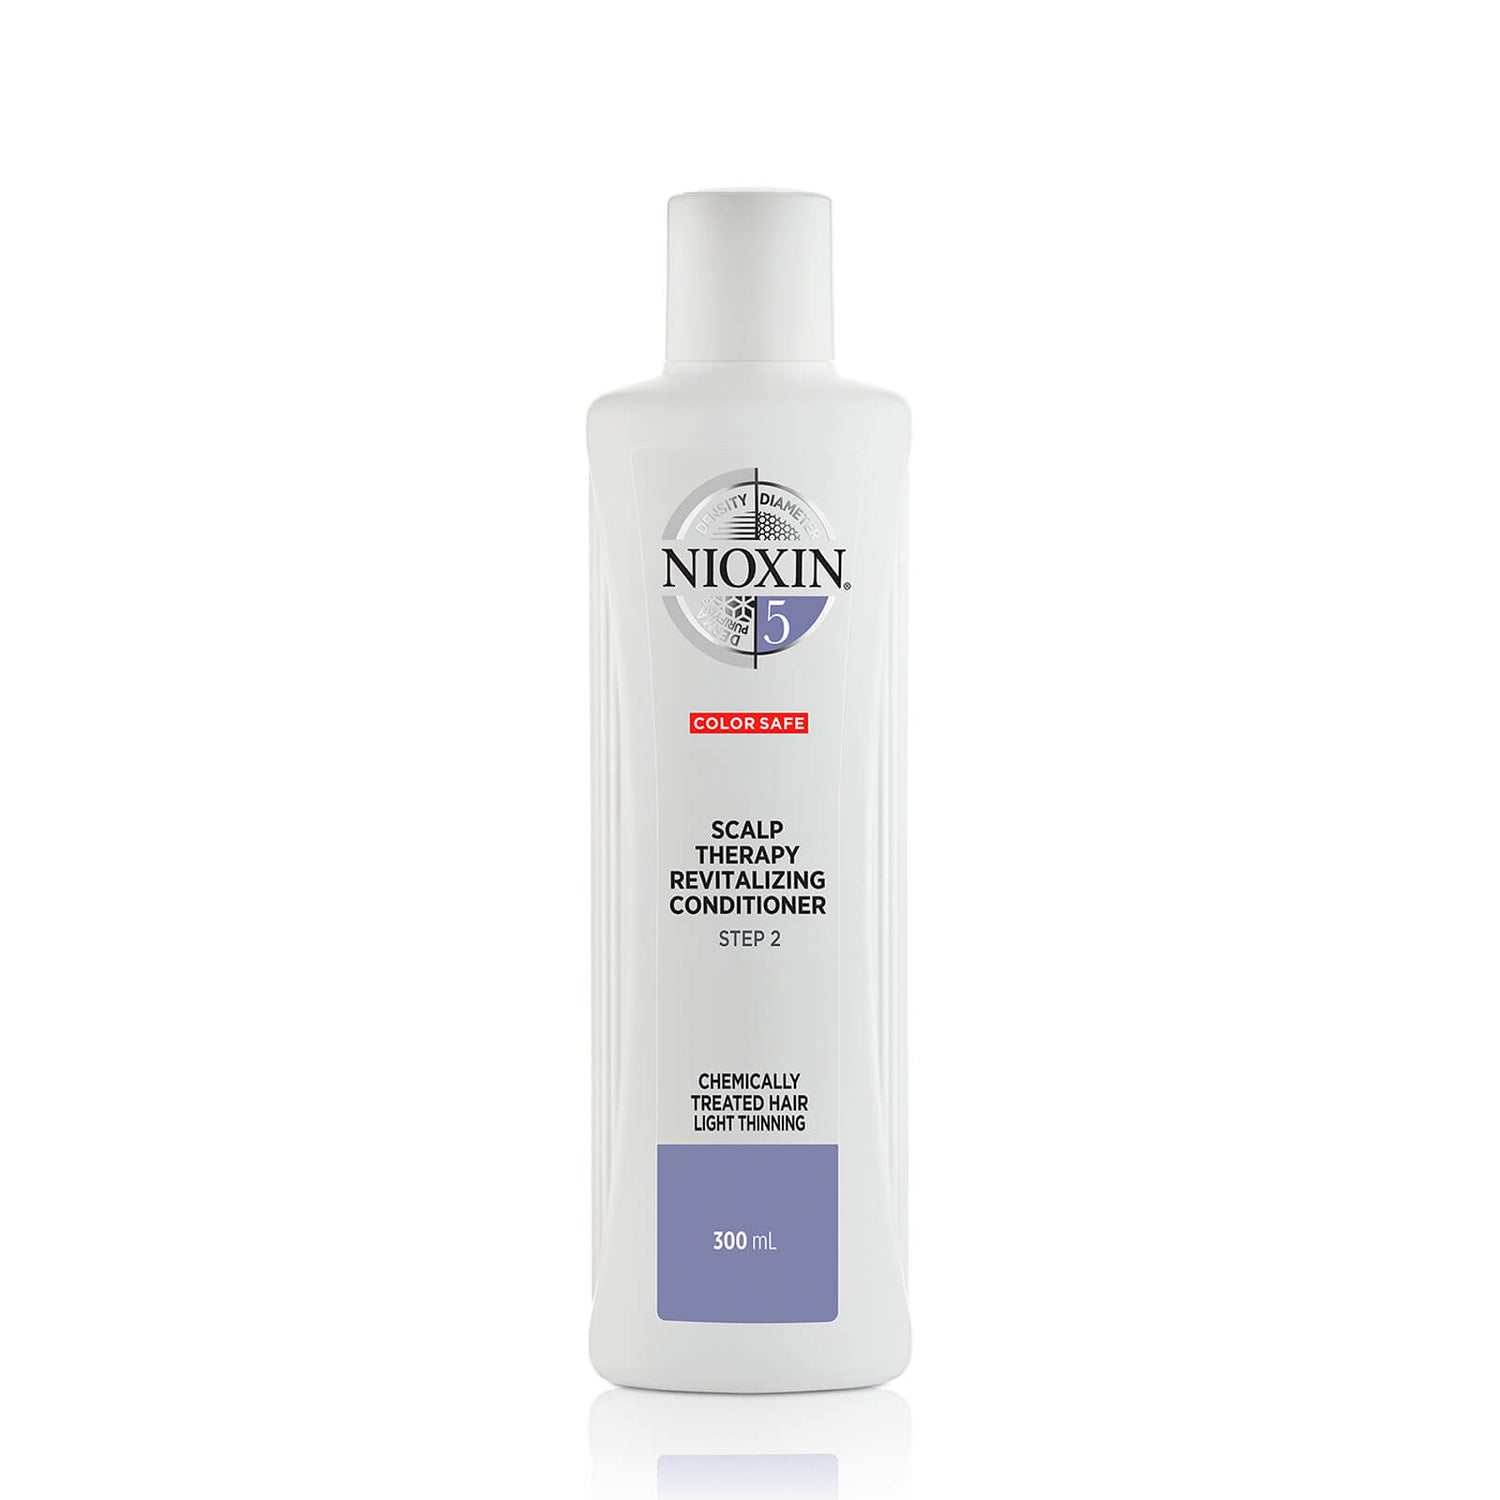 System 5 Revitalising 3-Part Scalp Therapy Conditioner for Chemically Treated Hair with Slight Thinning NIOXIN 300 ml